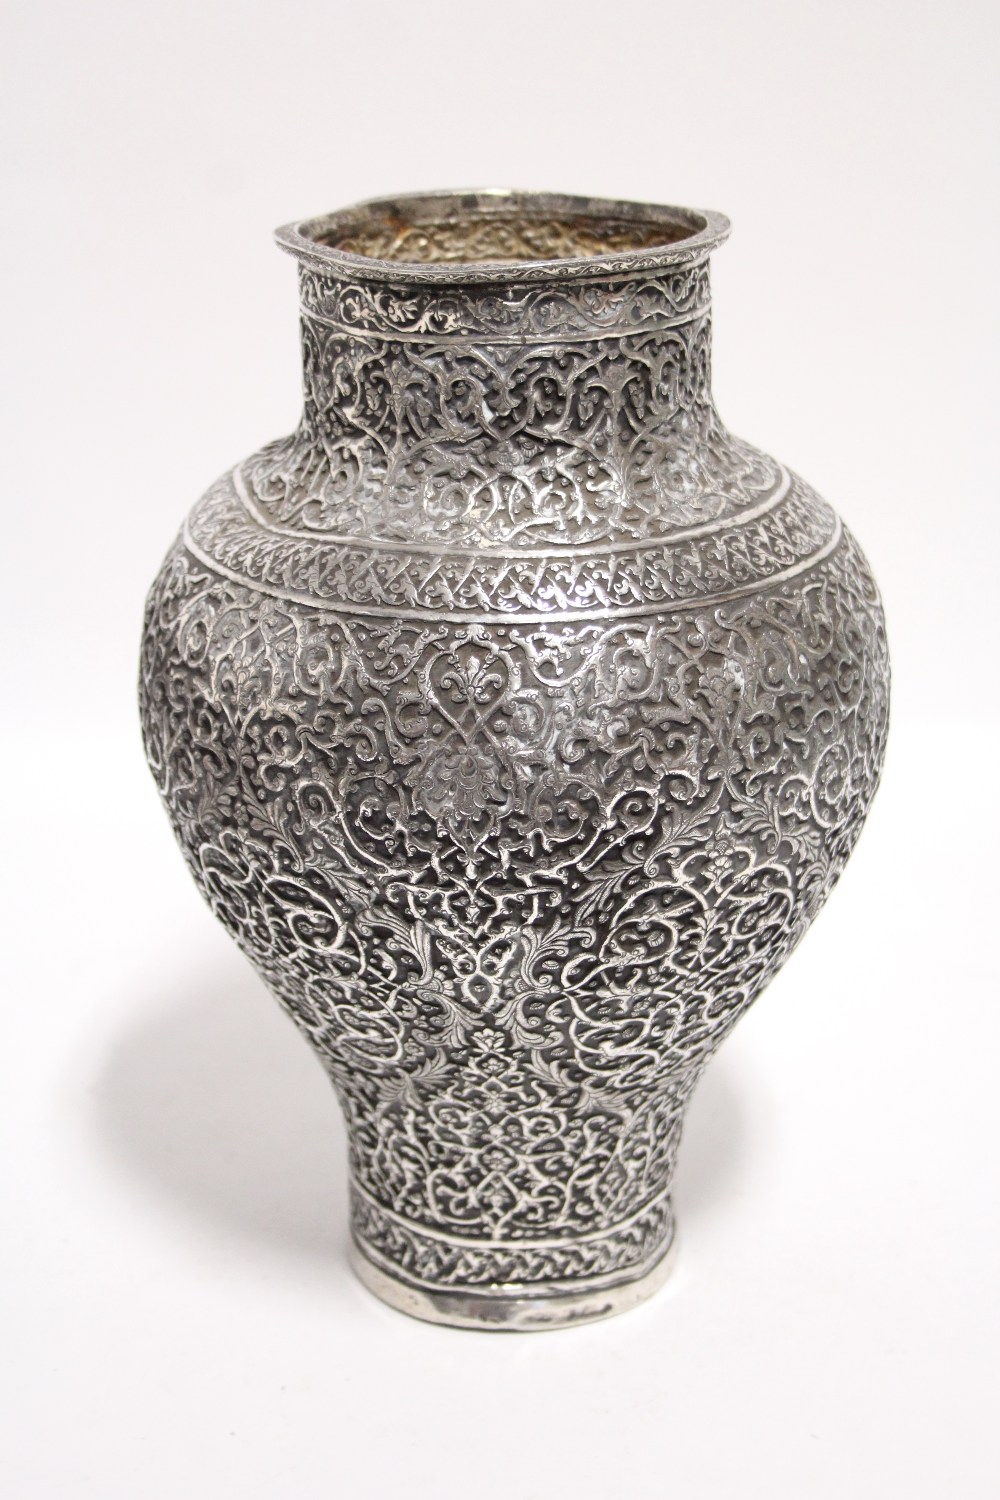 AN INDIAN SILVER VASE of ovoid form with narrow neck & foot, with all-over finely embossed &